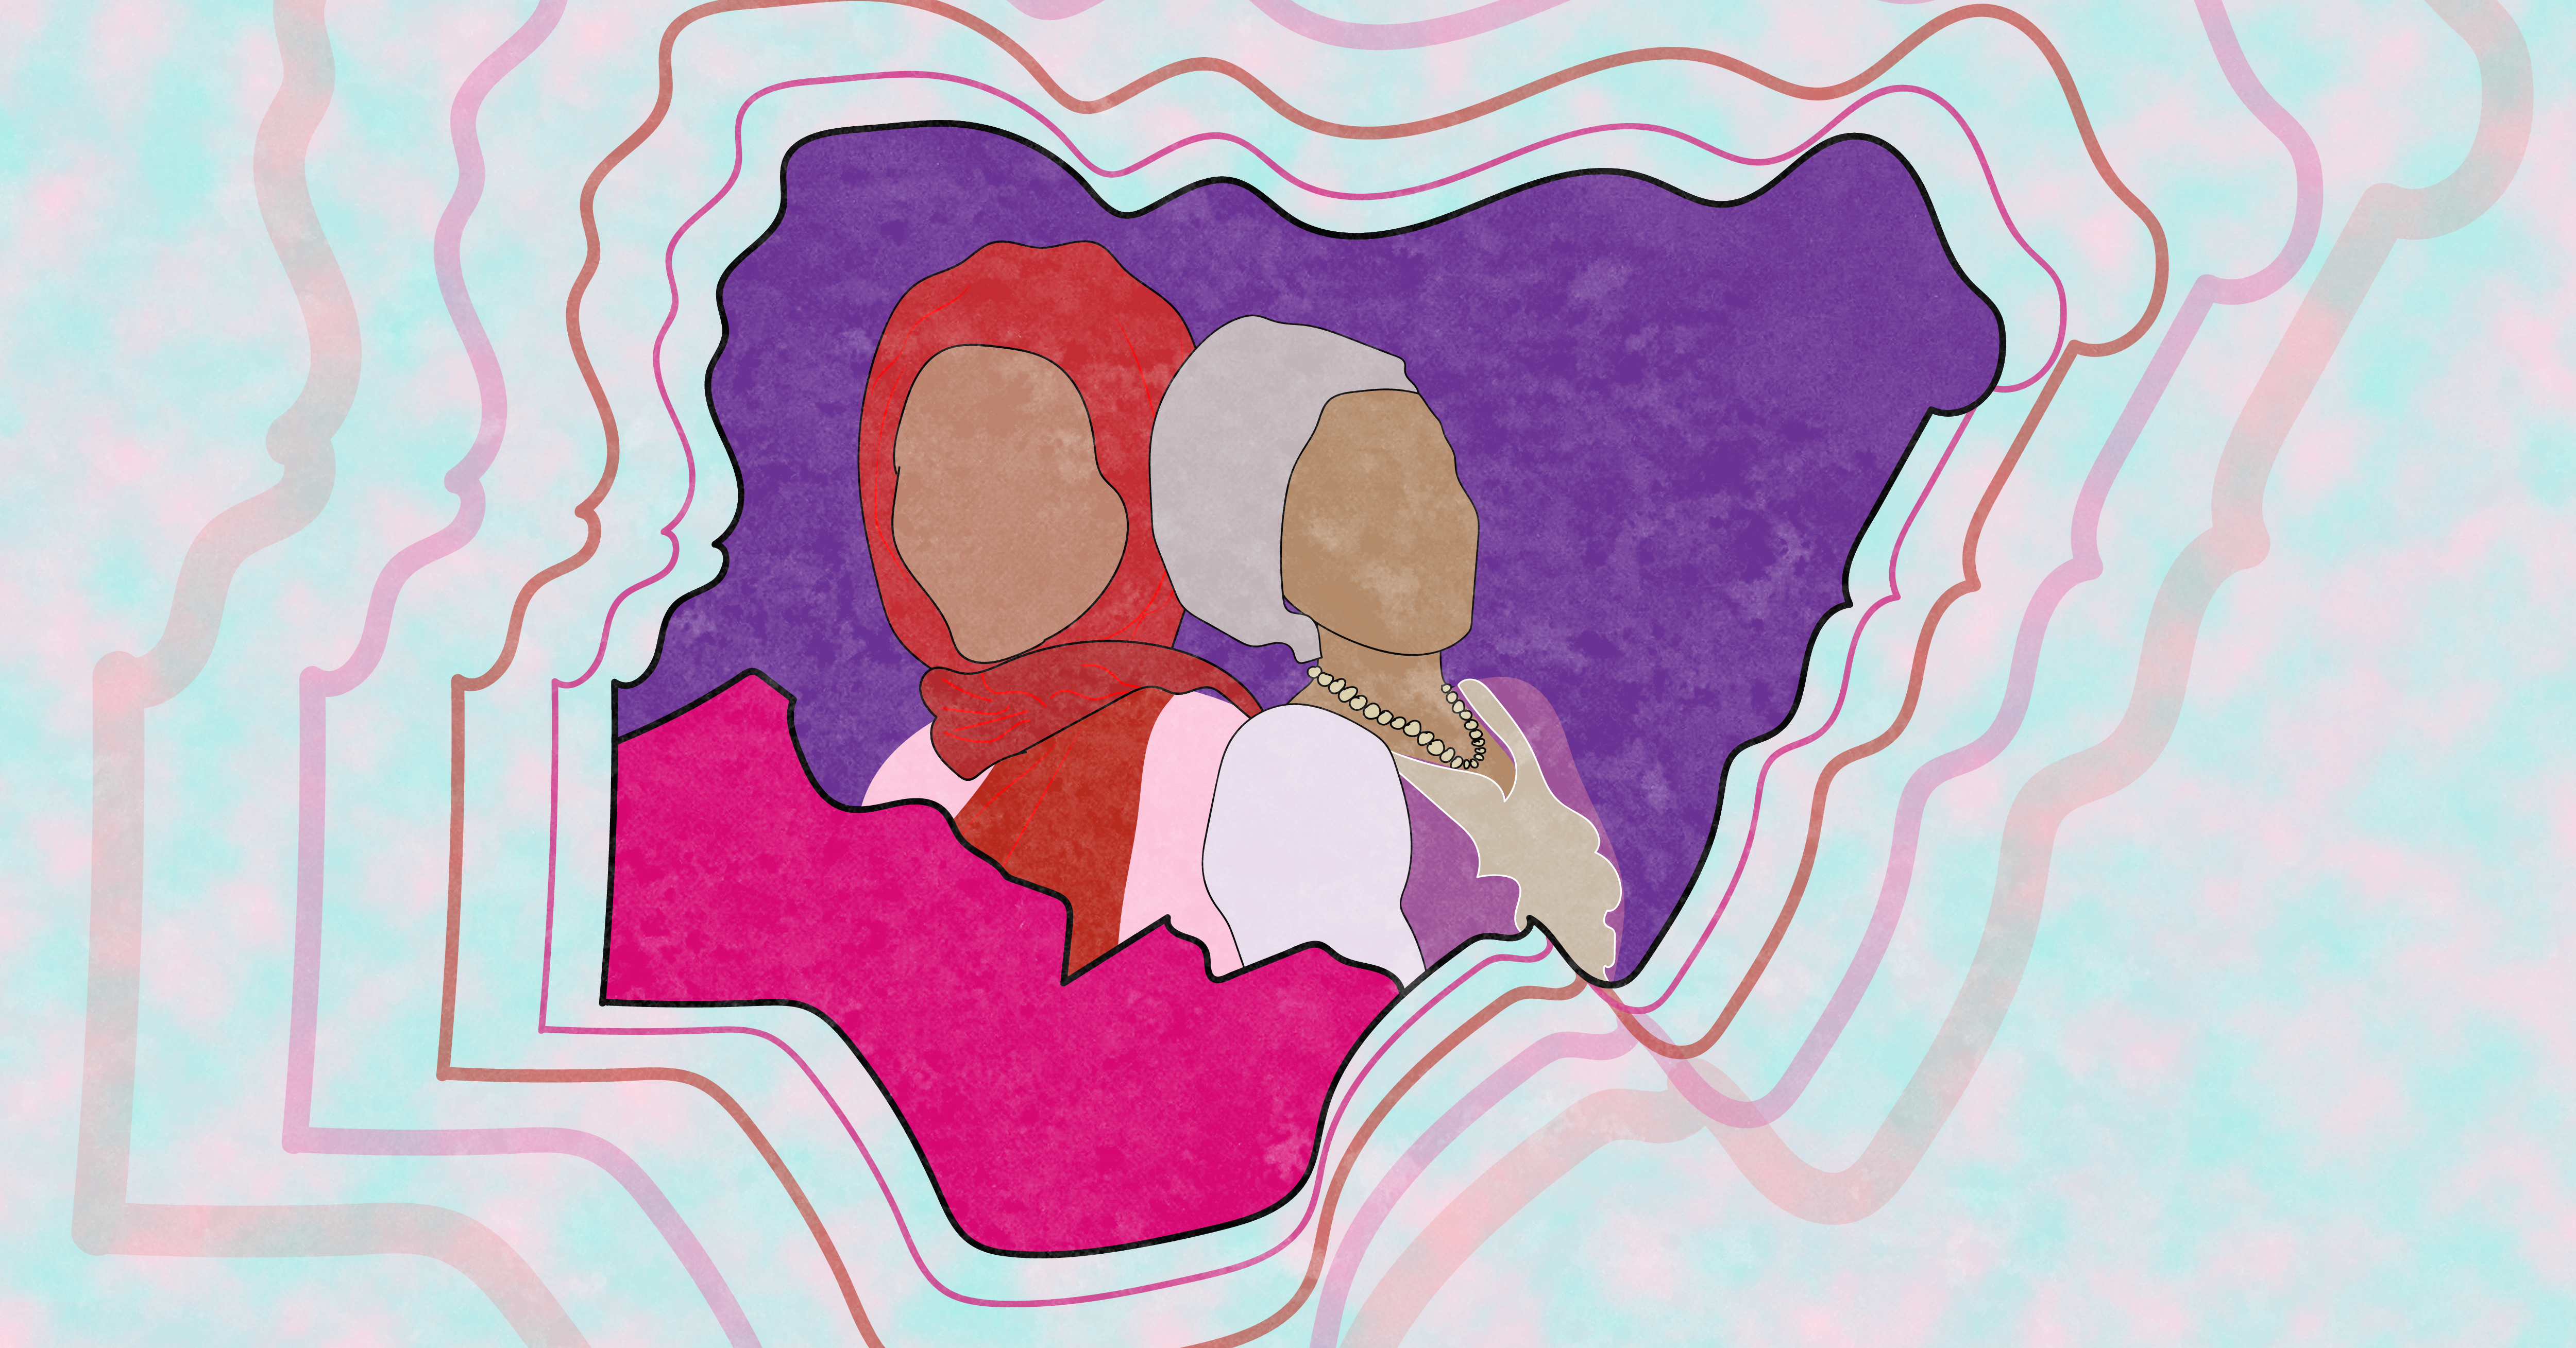 Two Hausa women in the Northern part of the Nigerian map.